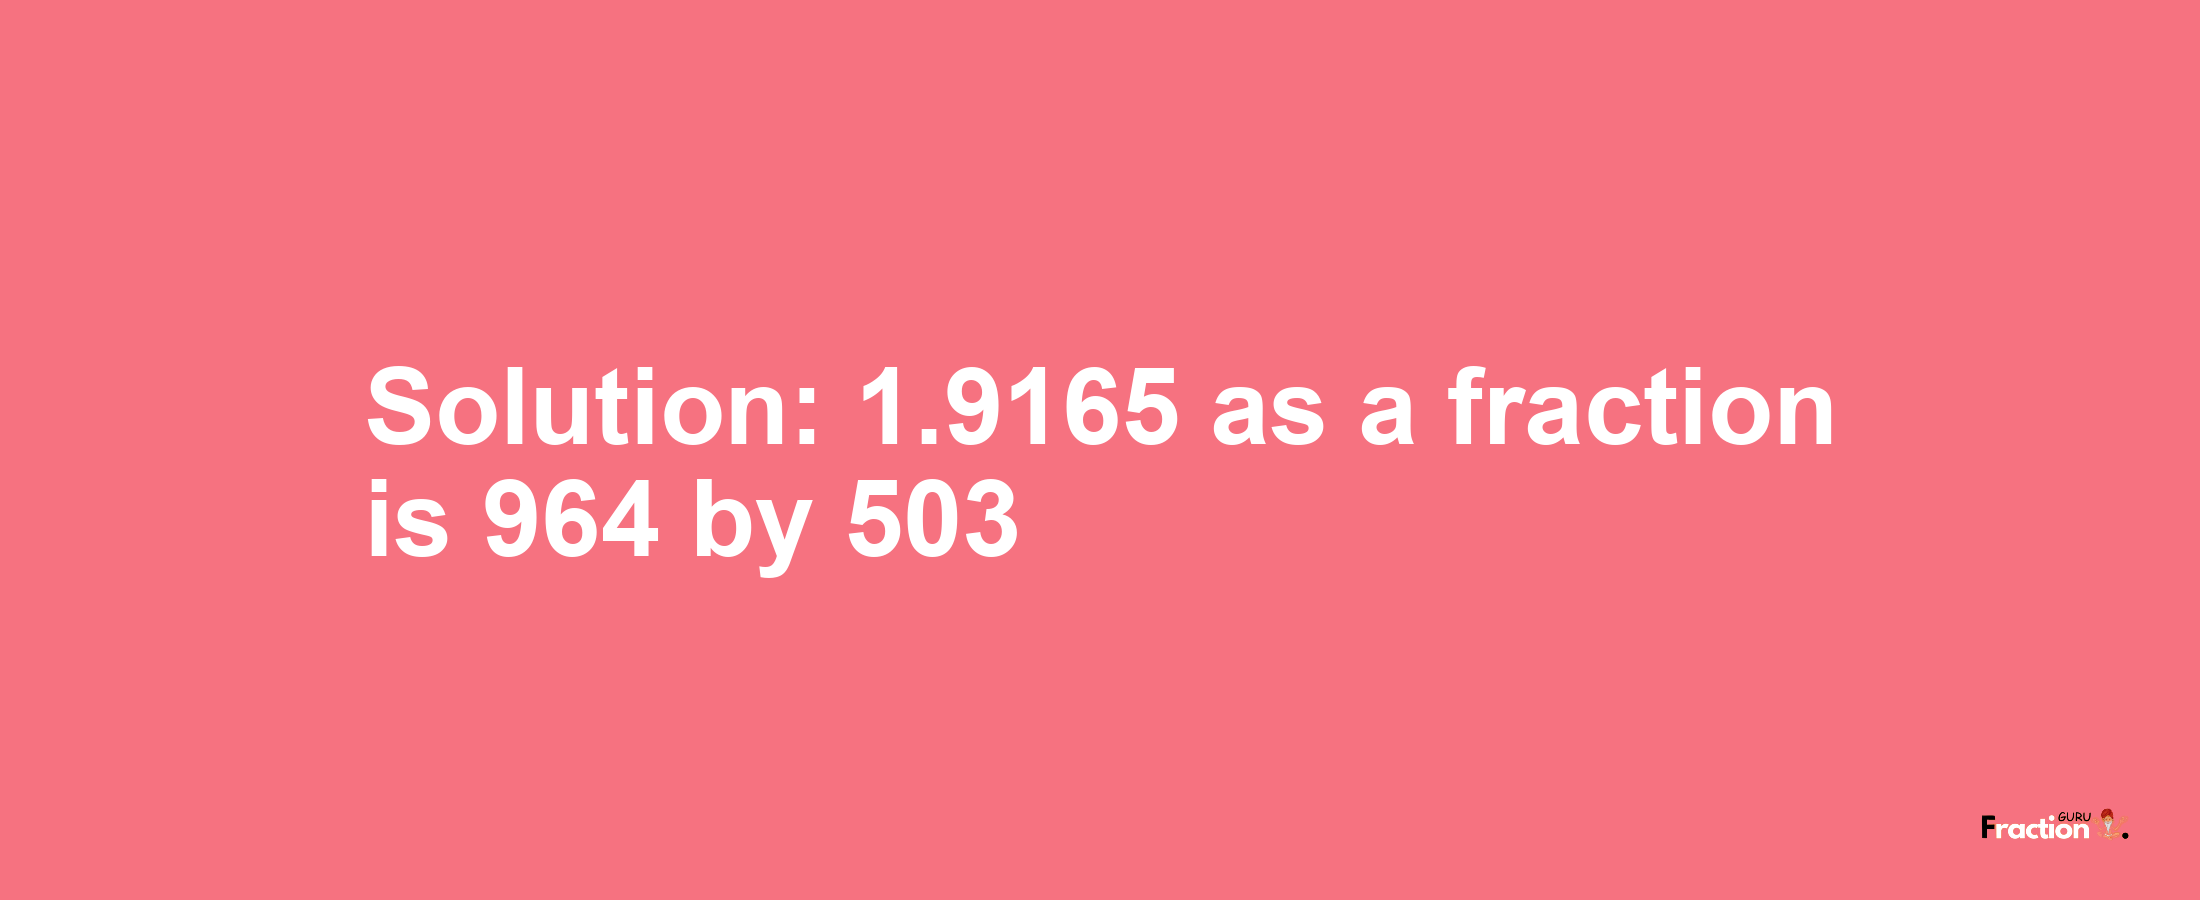 Solution:1.9165 as a fraction is 964/503